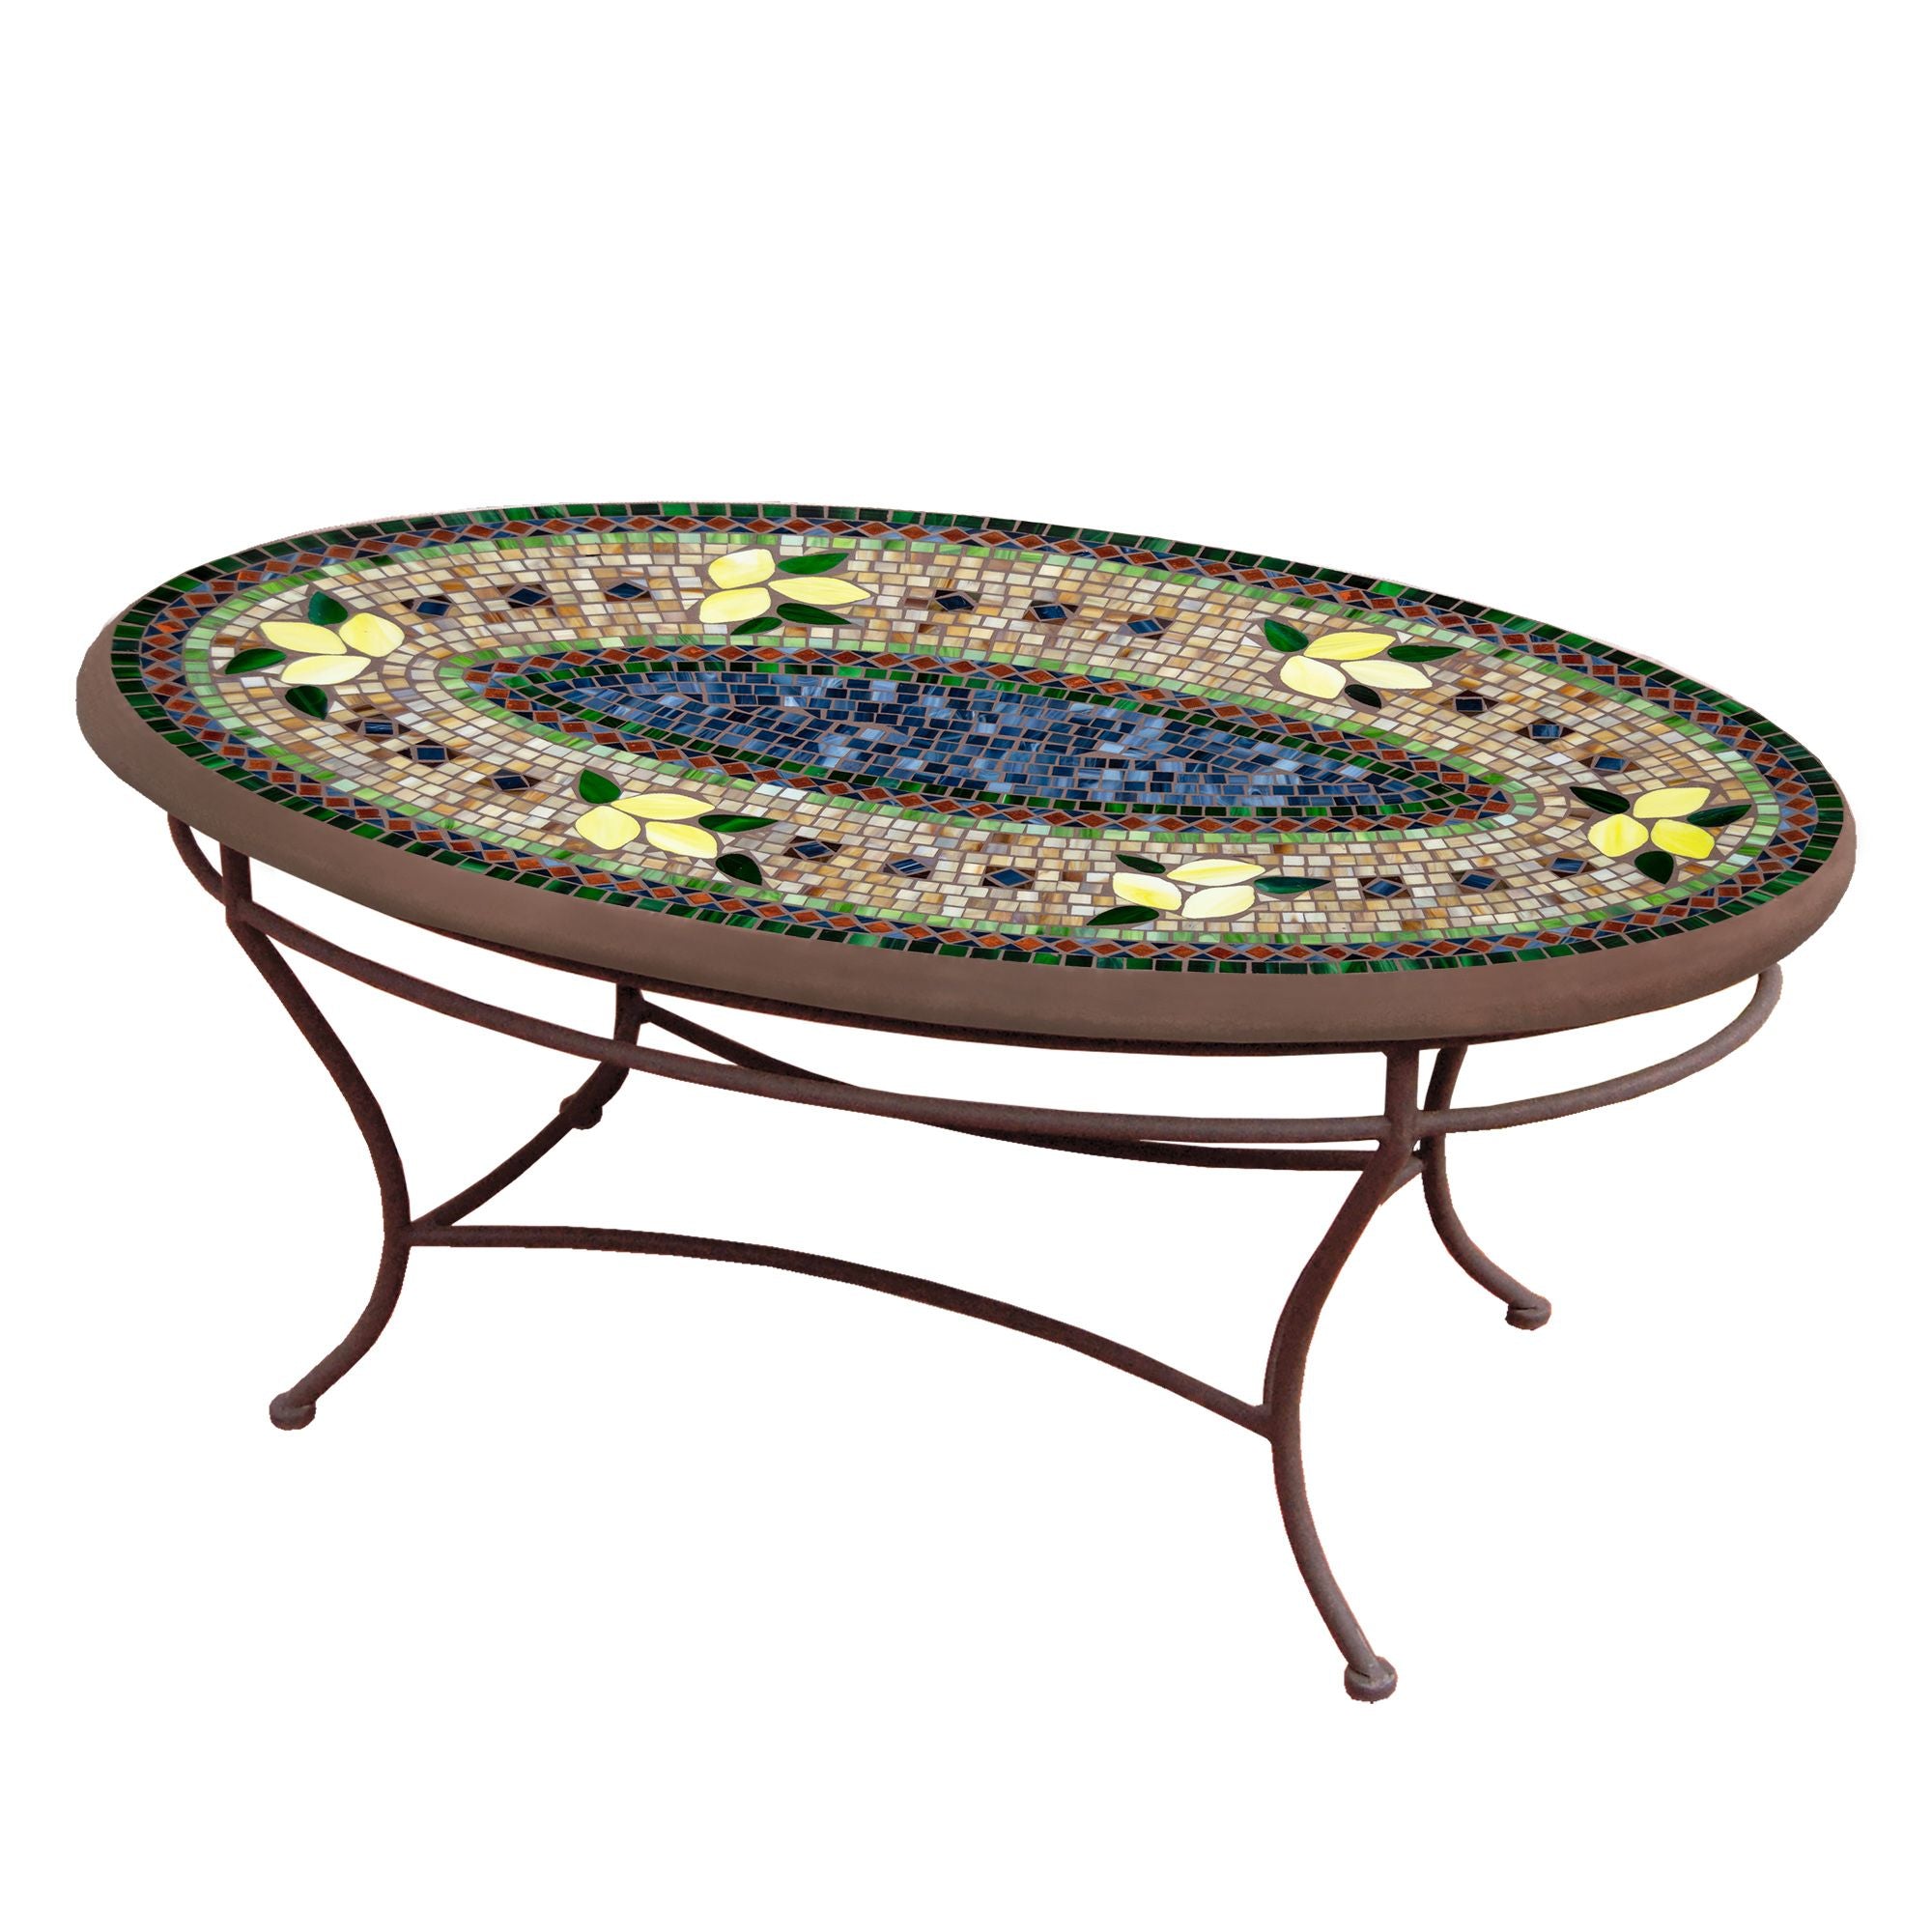 Tuscan Lemons Mosaic Coffee Table - Oval-Iron Accents